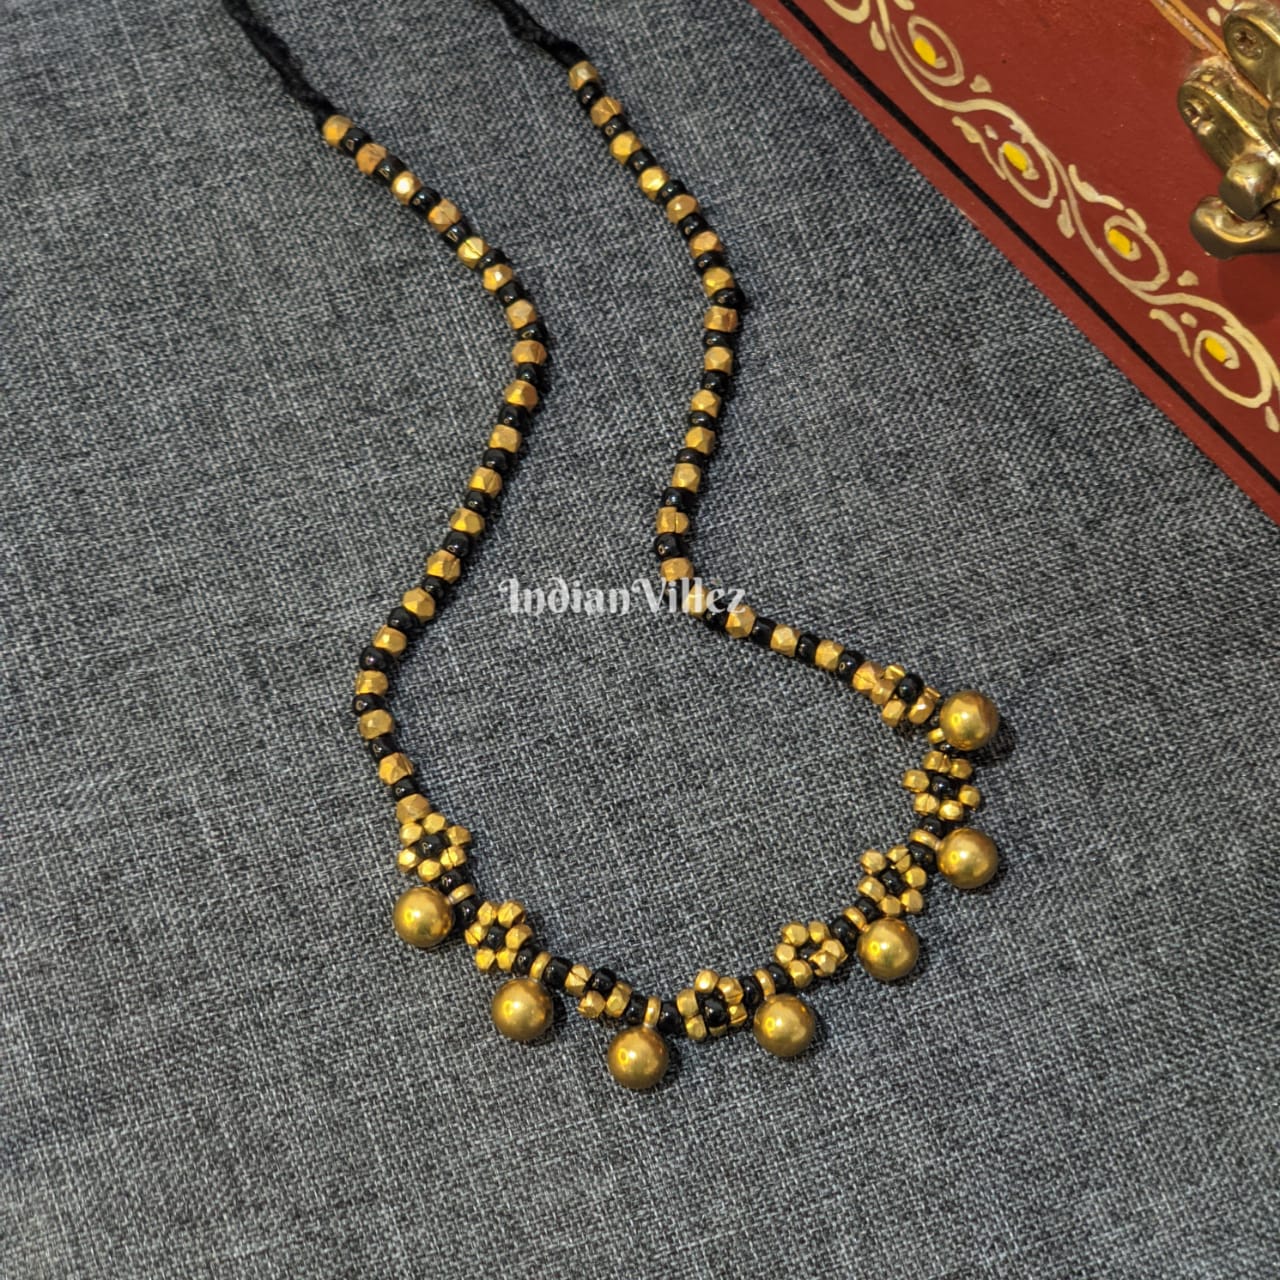 Handicrafted Dhokra Tribal Necklace